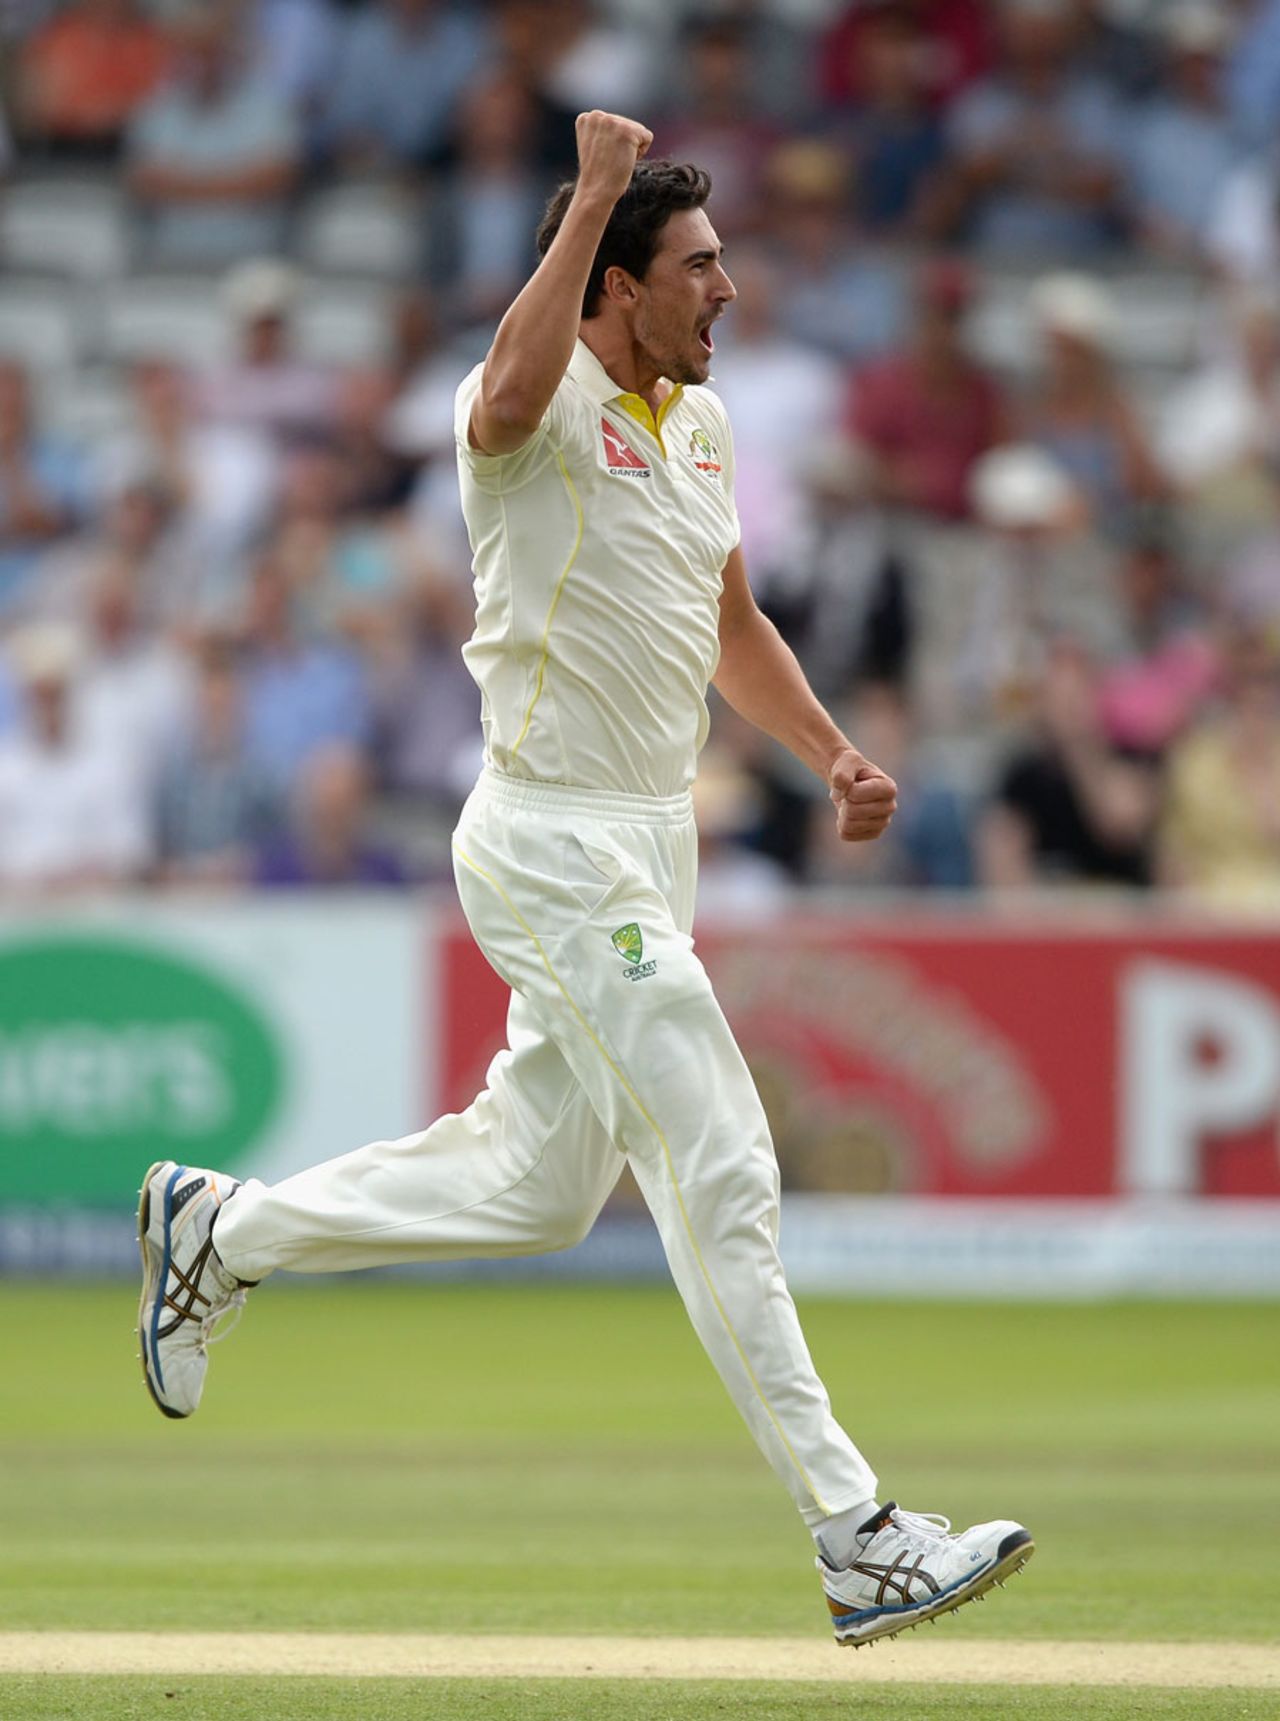 Mitchell Starc struck with his second ball, England v Australia, 2nd Investec Ashes Test, Lord's, 2nd day, July 17, 2015